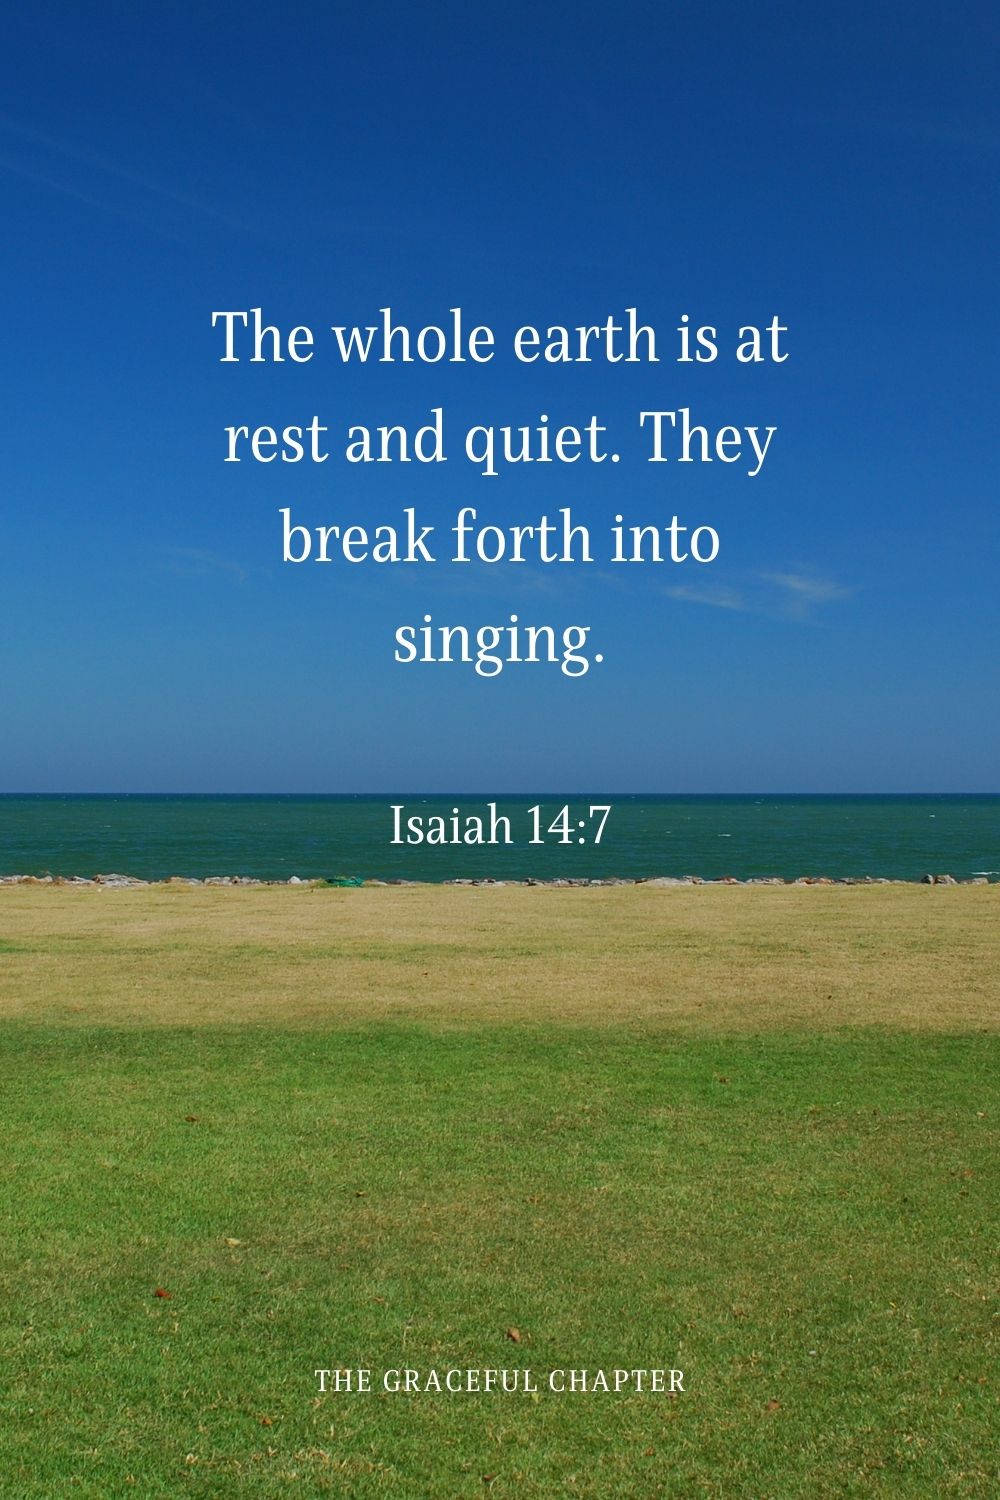 The whole earth is at rest and quiet. They break forth into singing.